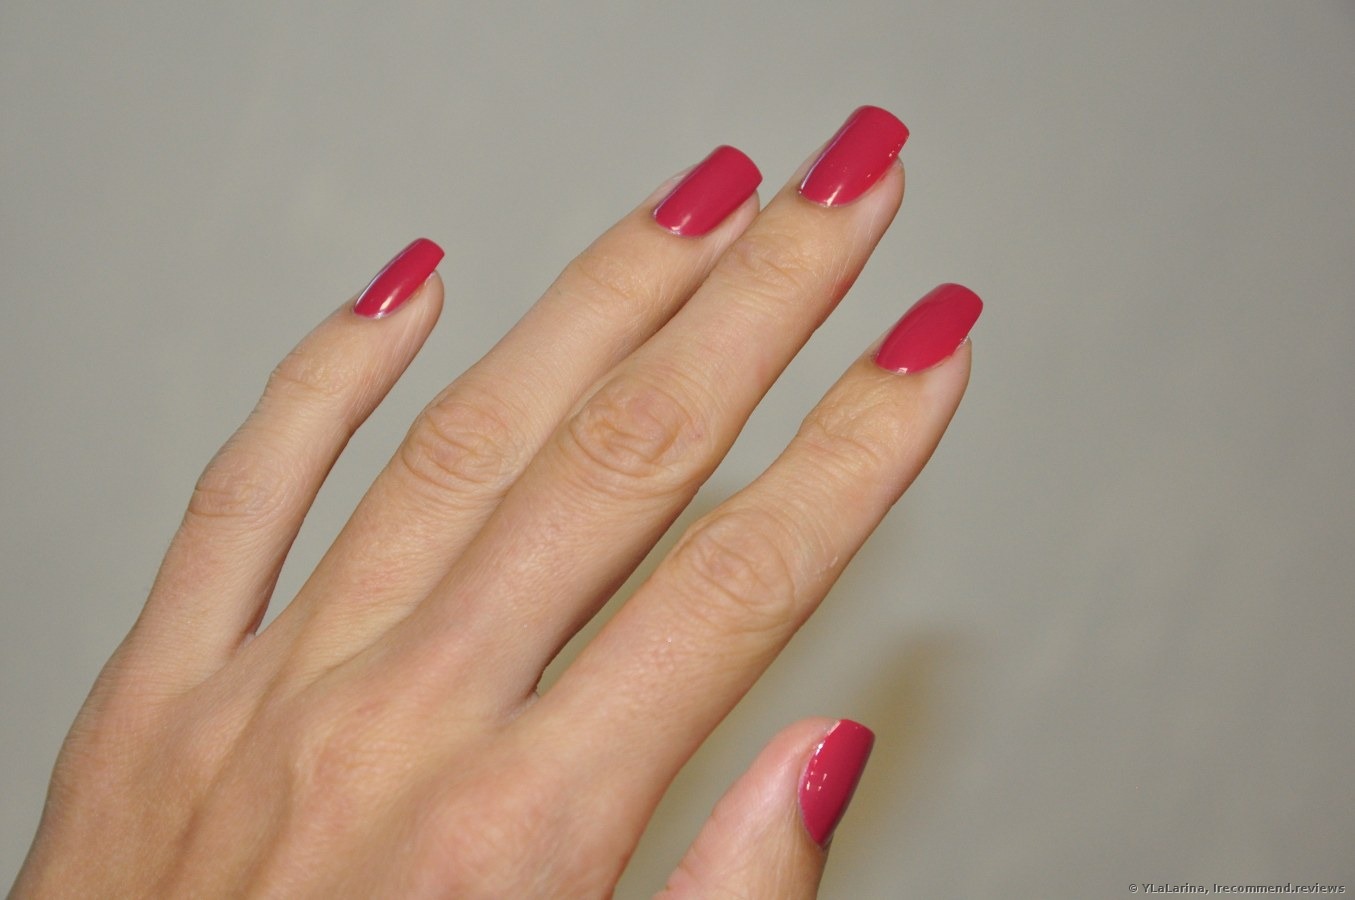 Orly Nail Lacquer in "Nude Rose" - wide 5